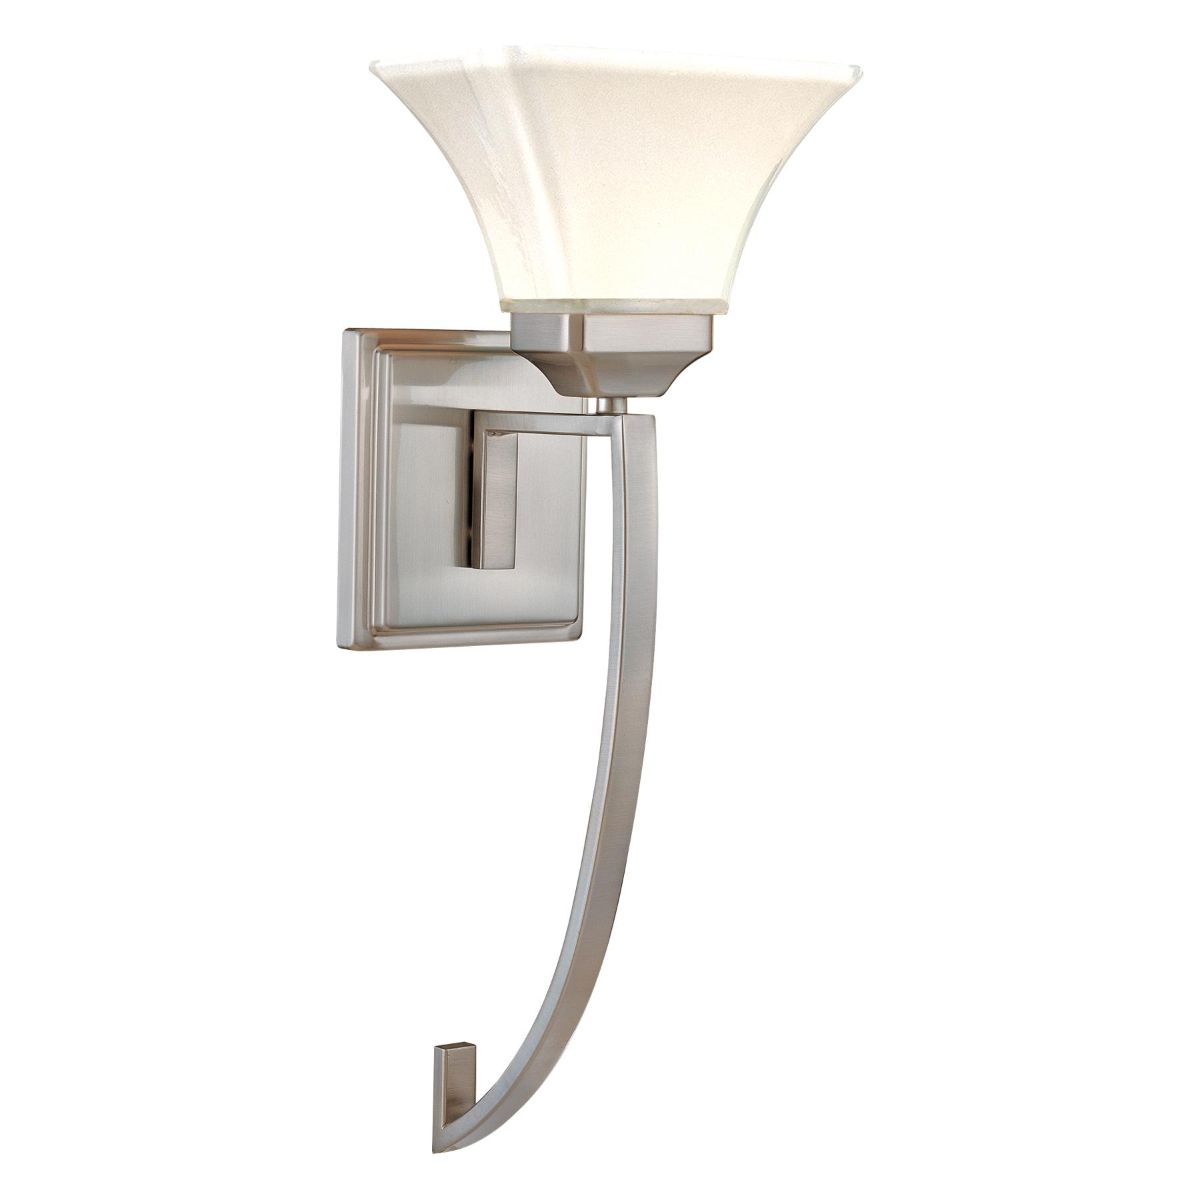 Agilis 20 in. Armed Sconce Brushed Nickel finish